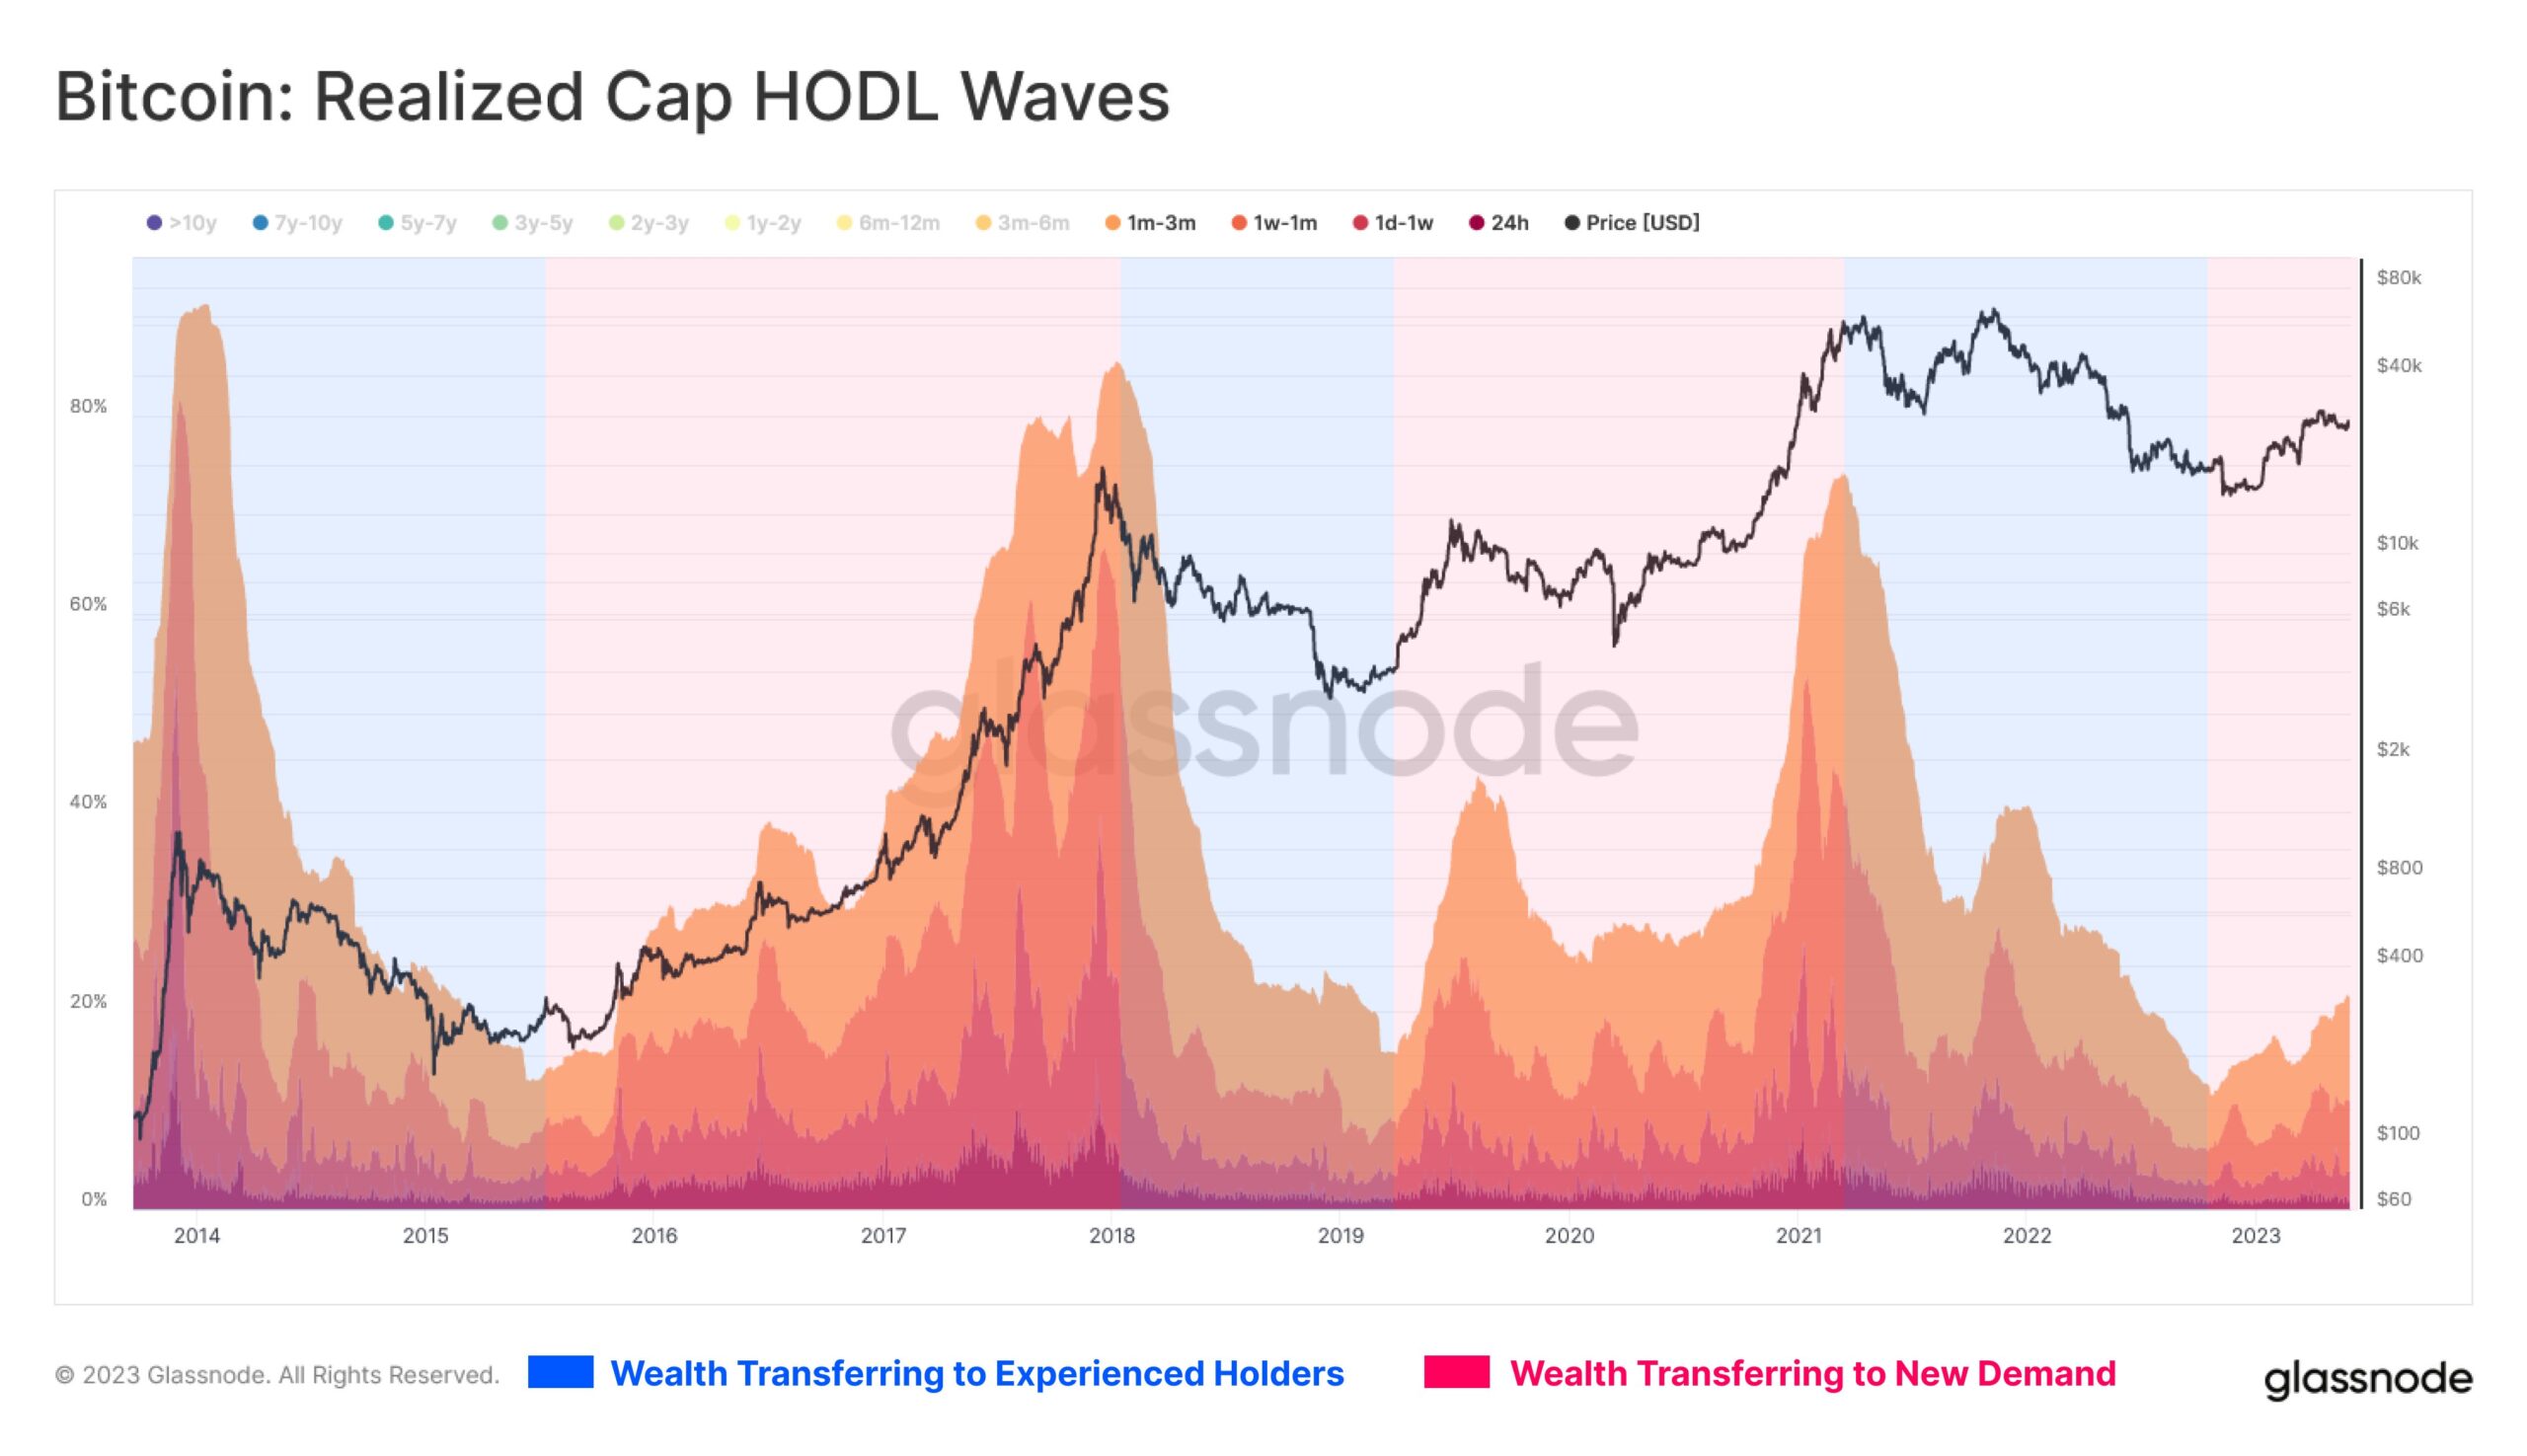  suggests transfer wealth bitcoin point inflection cycle 